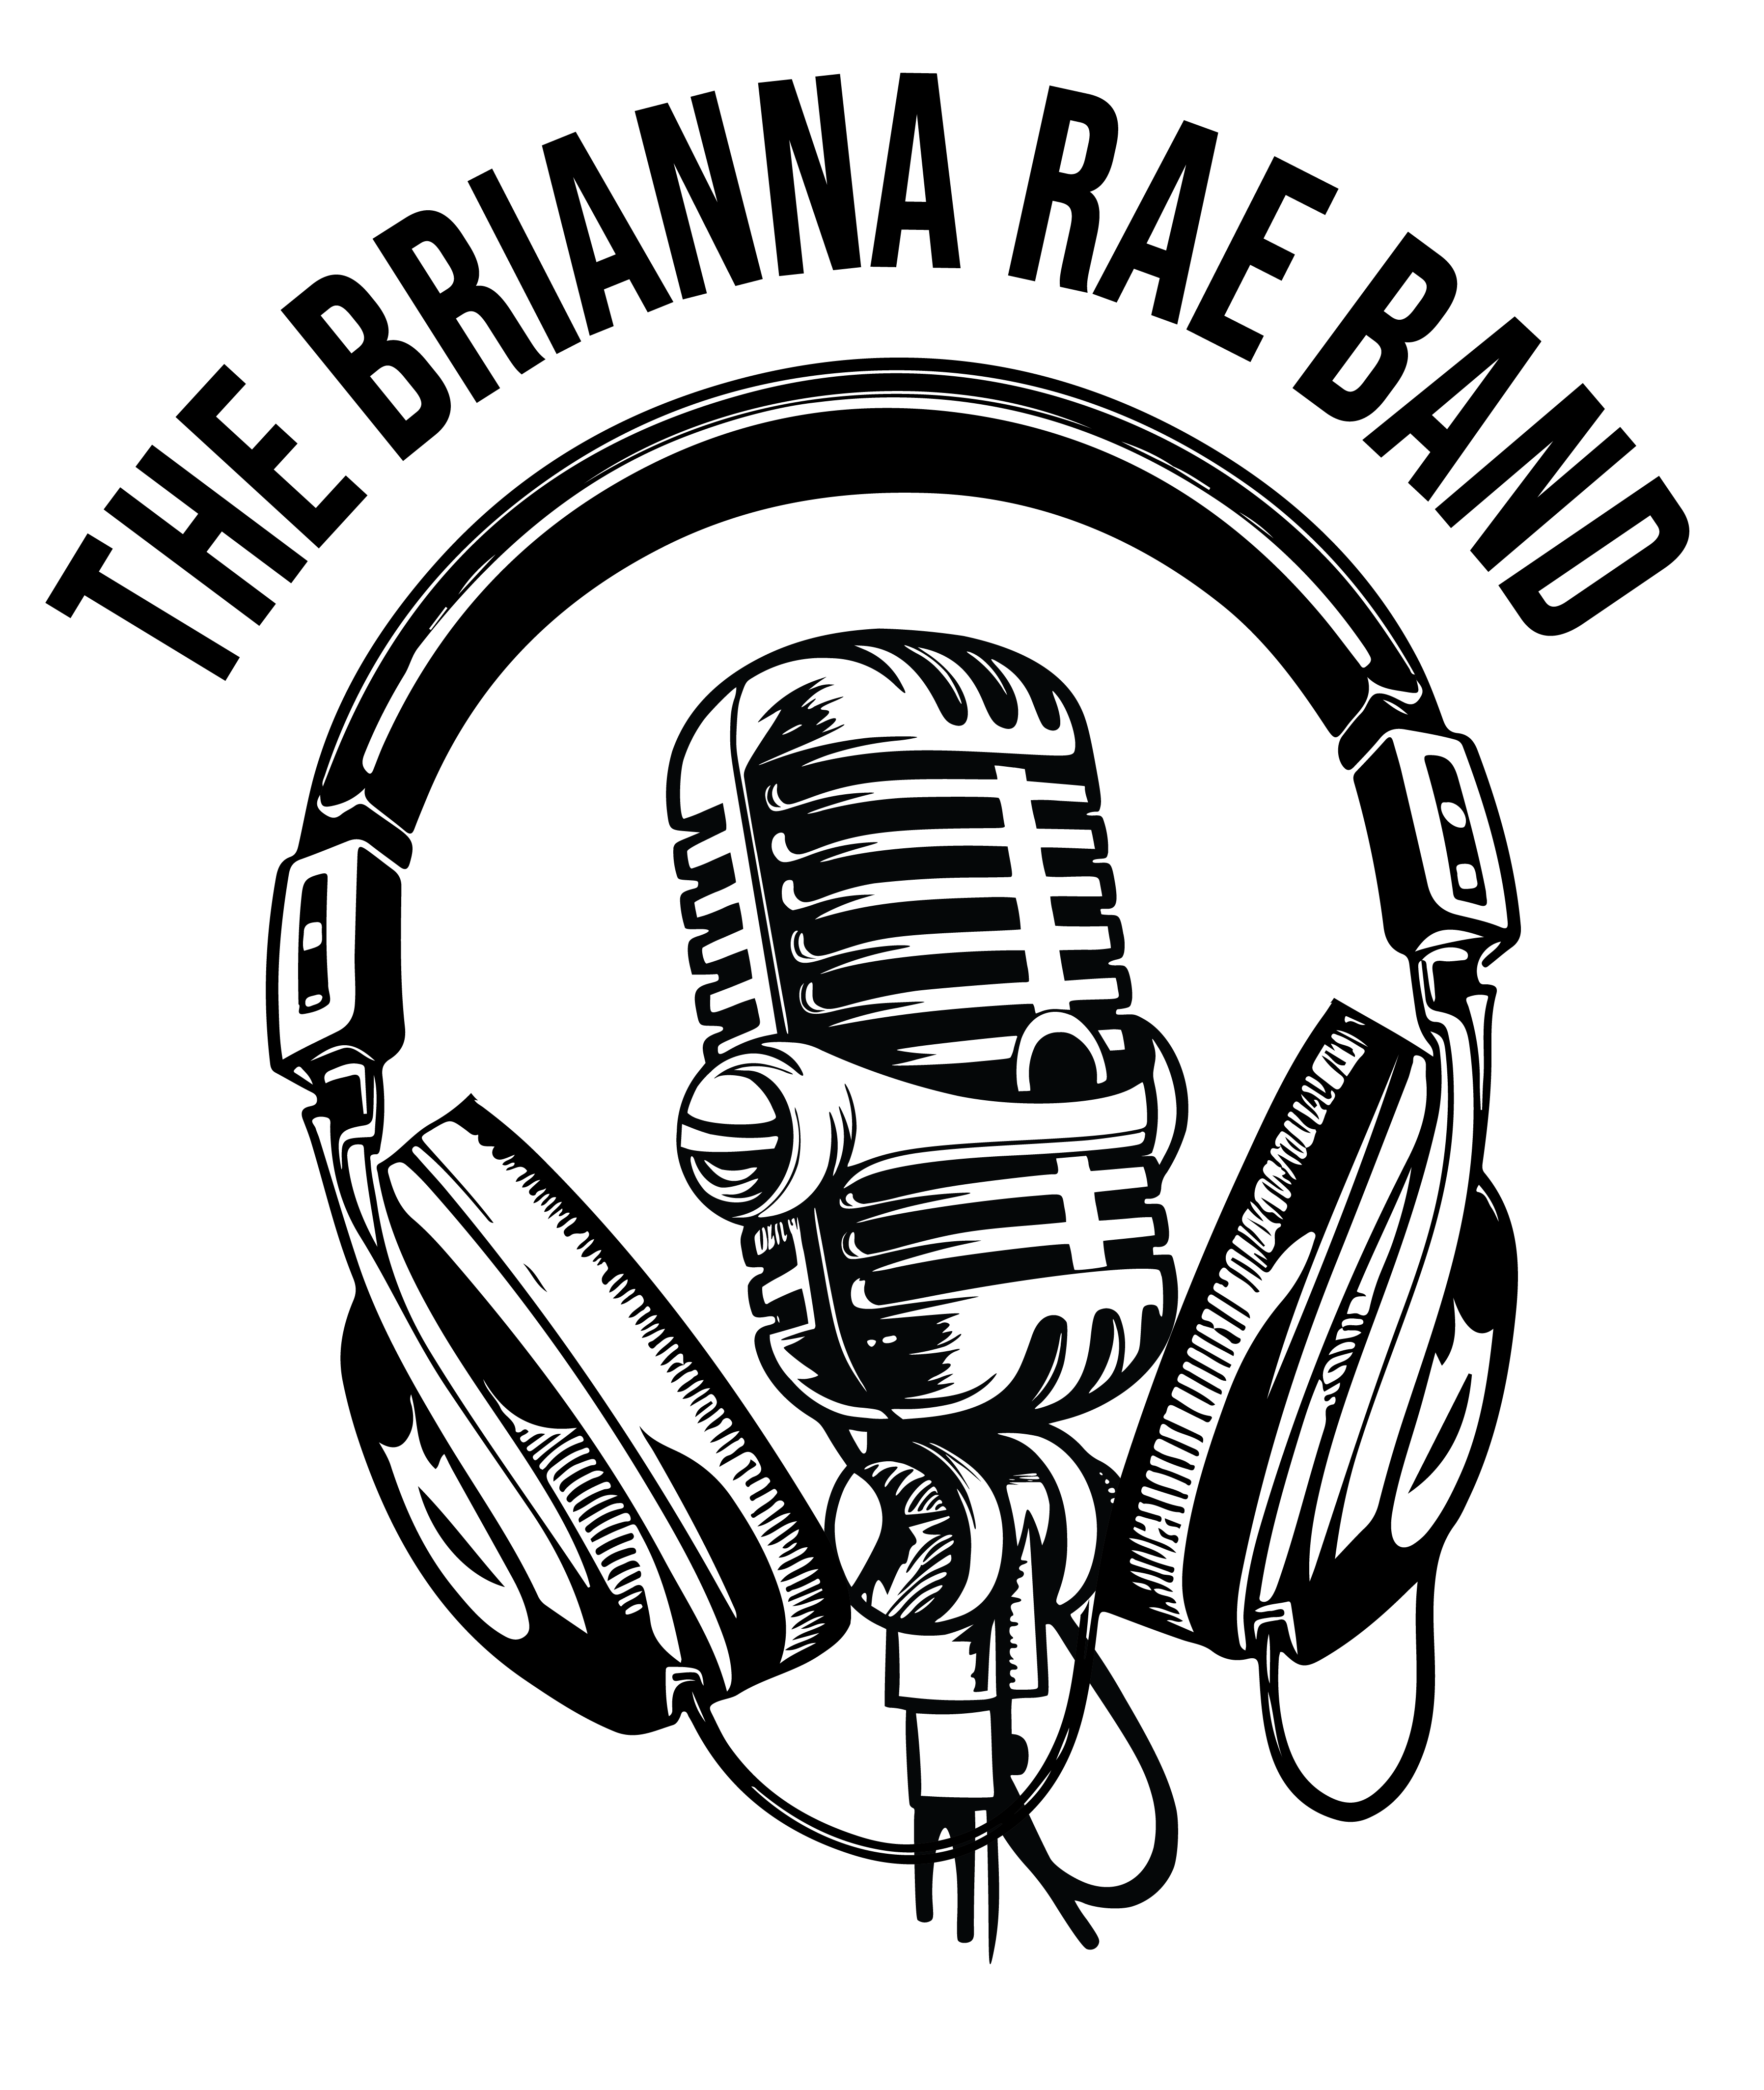 The Brianna Rae Band name written over a pair of headphones over a vintage microphone